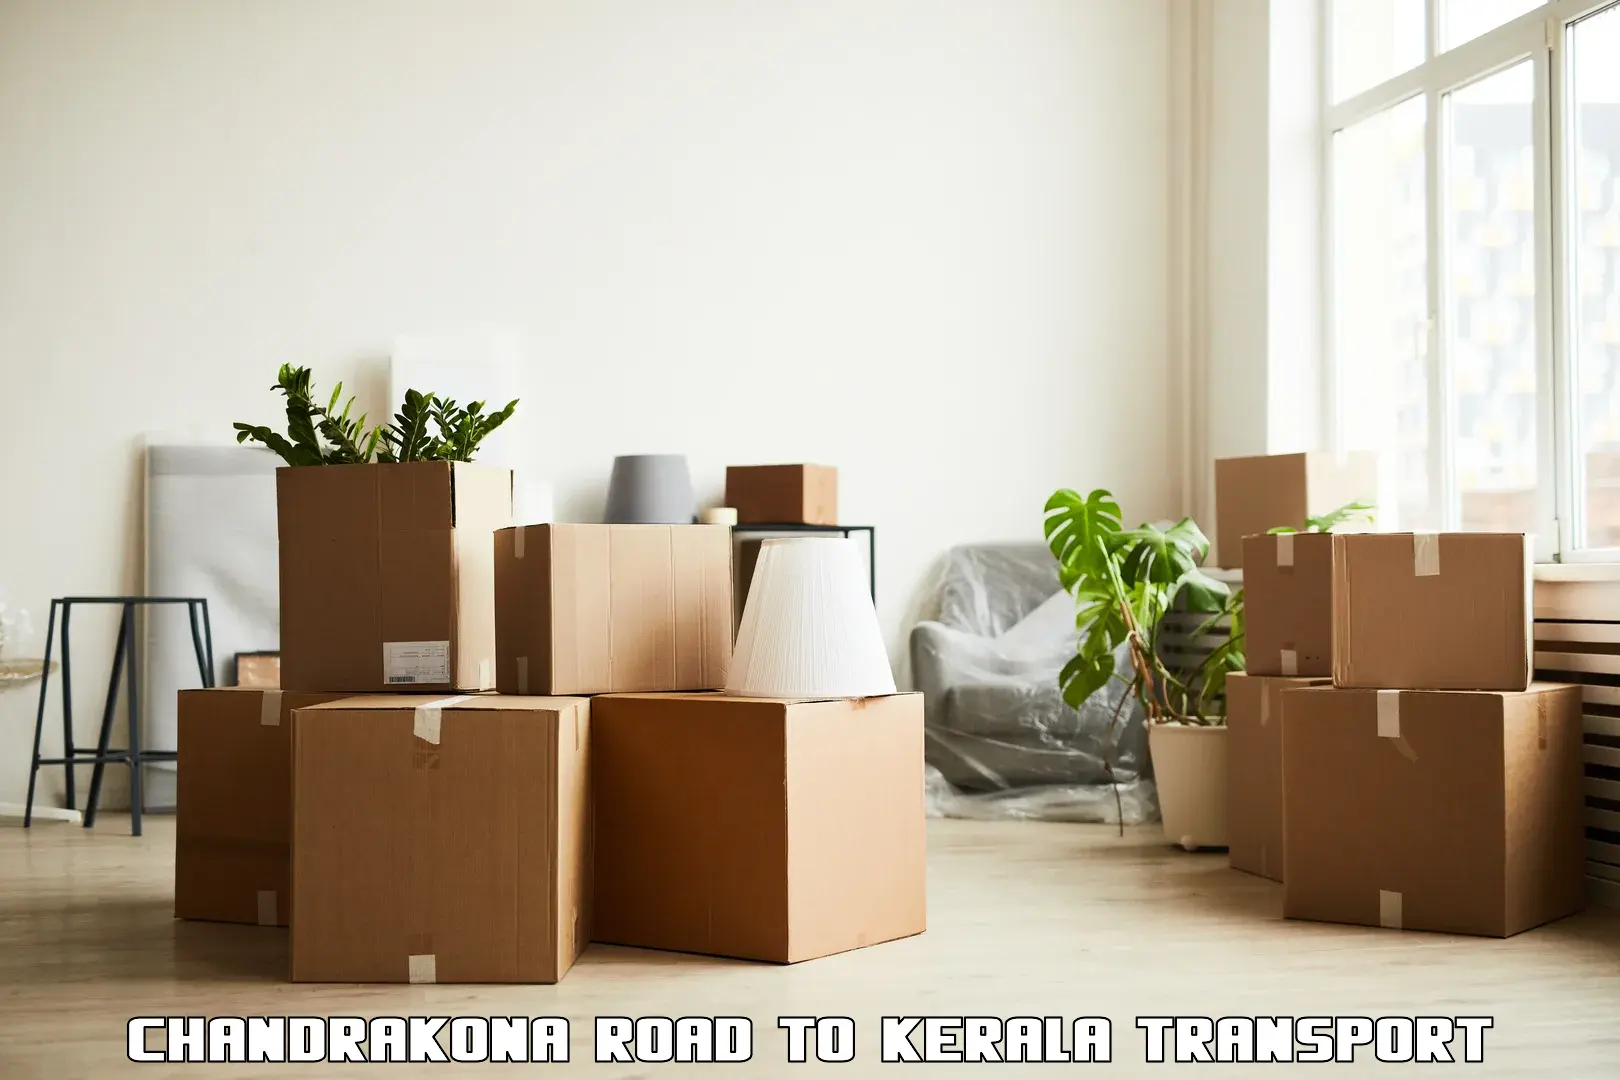 Package delivery services Chandrakona Road to Kerala